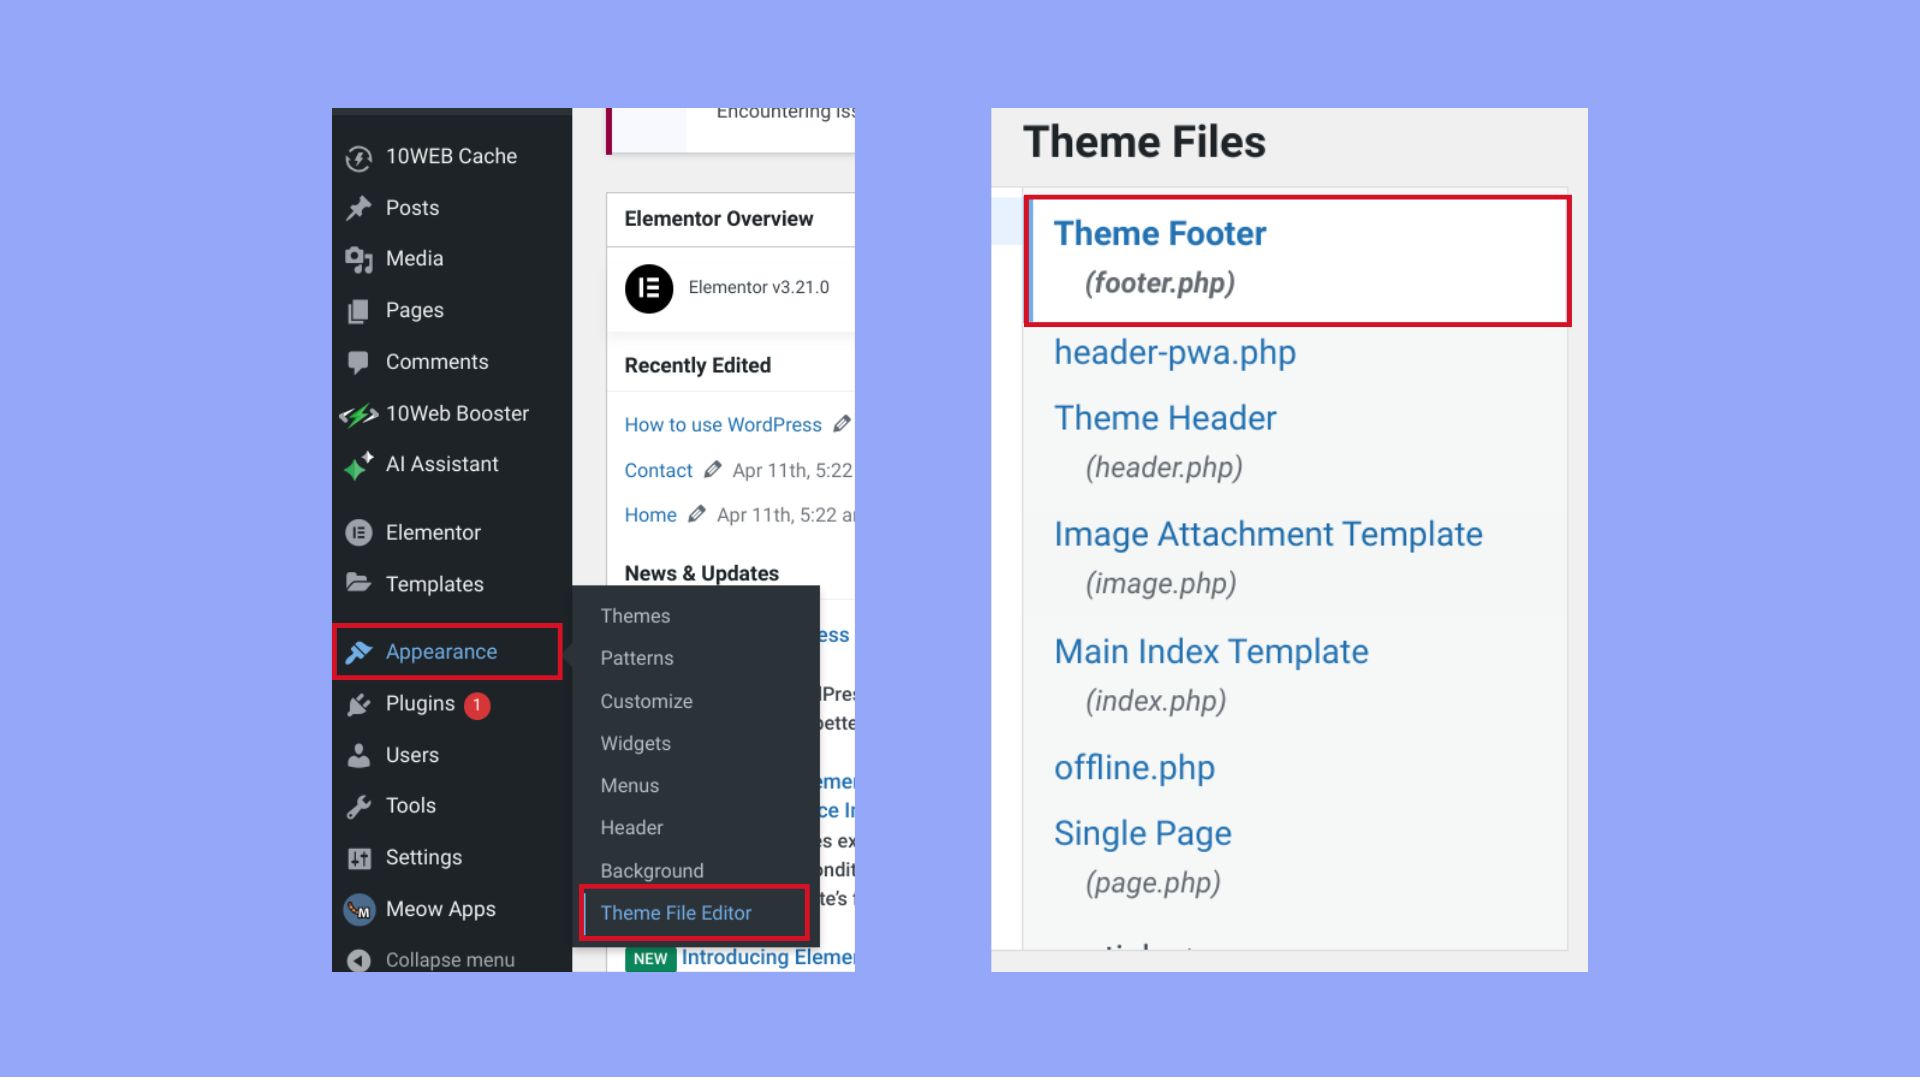 How to Edit Footer in WordPress